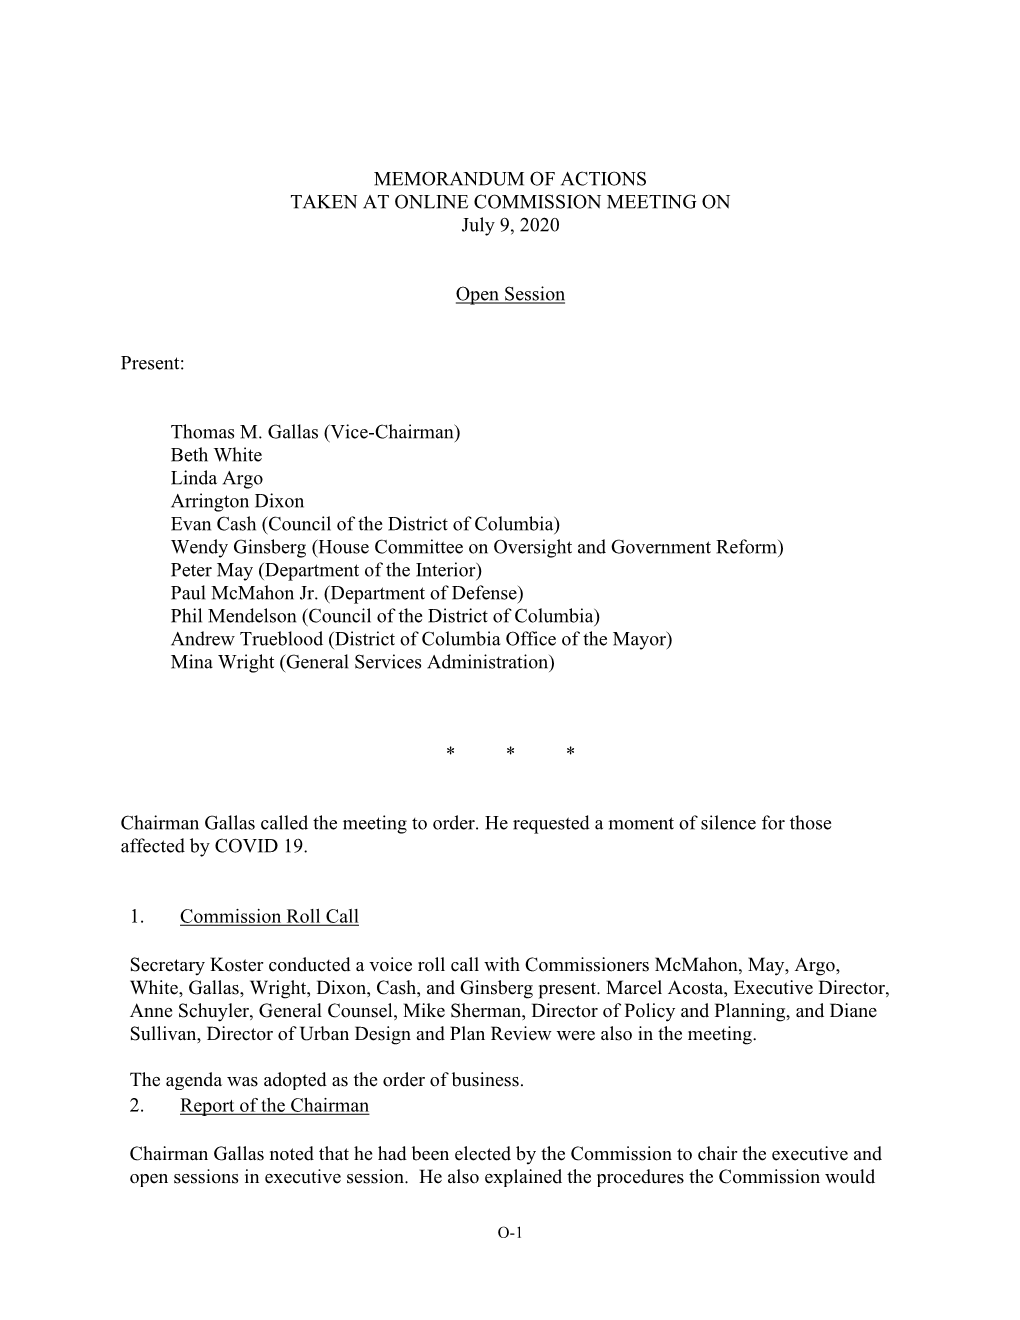 Memorandum of Actions for the July 9, 2020 Commission Meeting